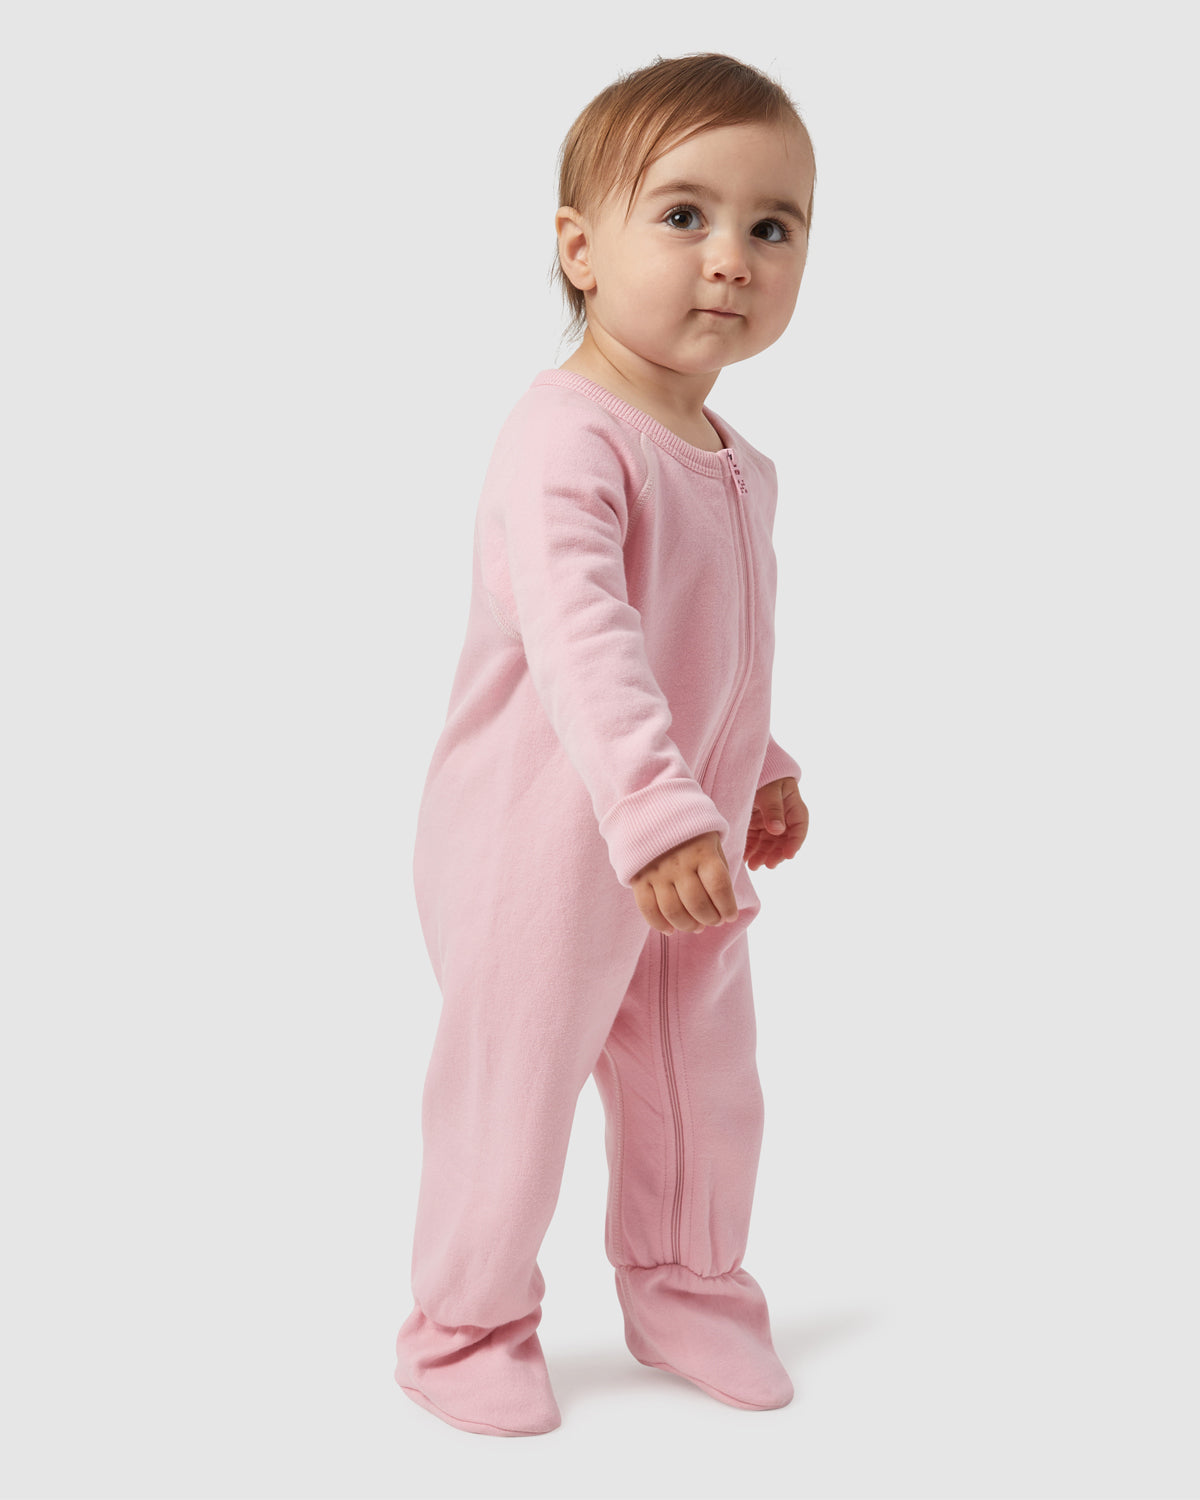 Levi Sweatsuit in Candy Pink By Morgan Lane